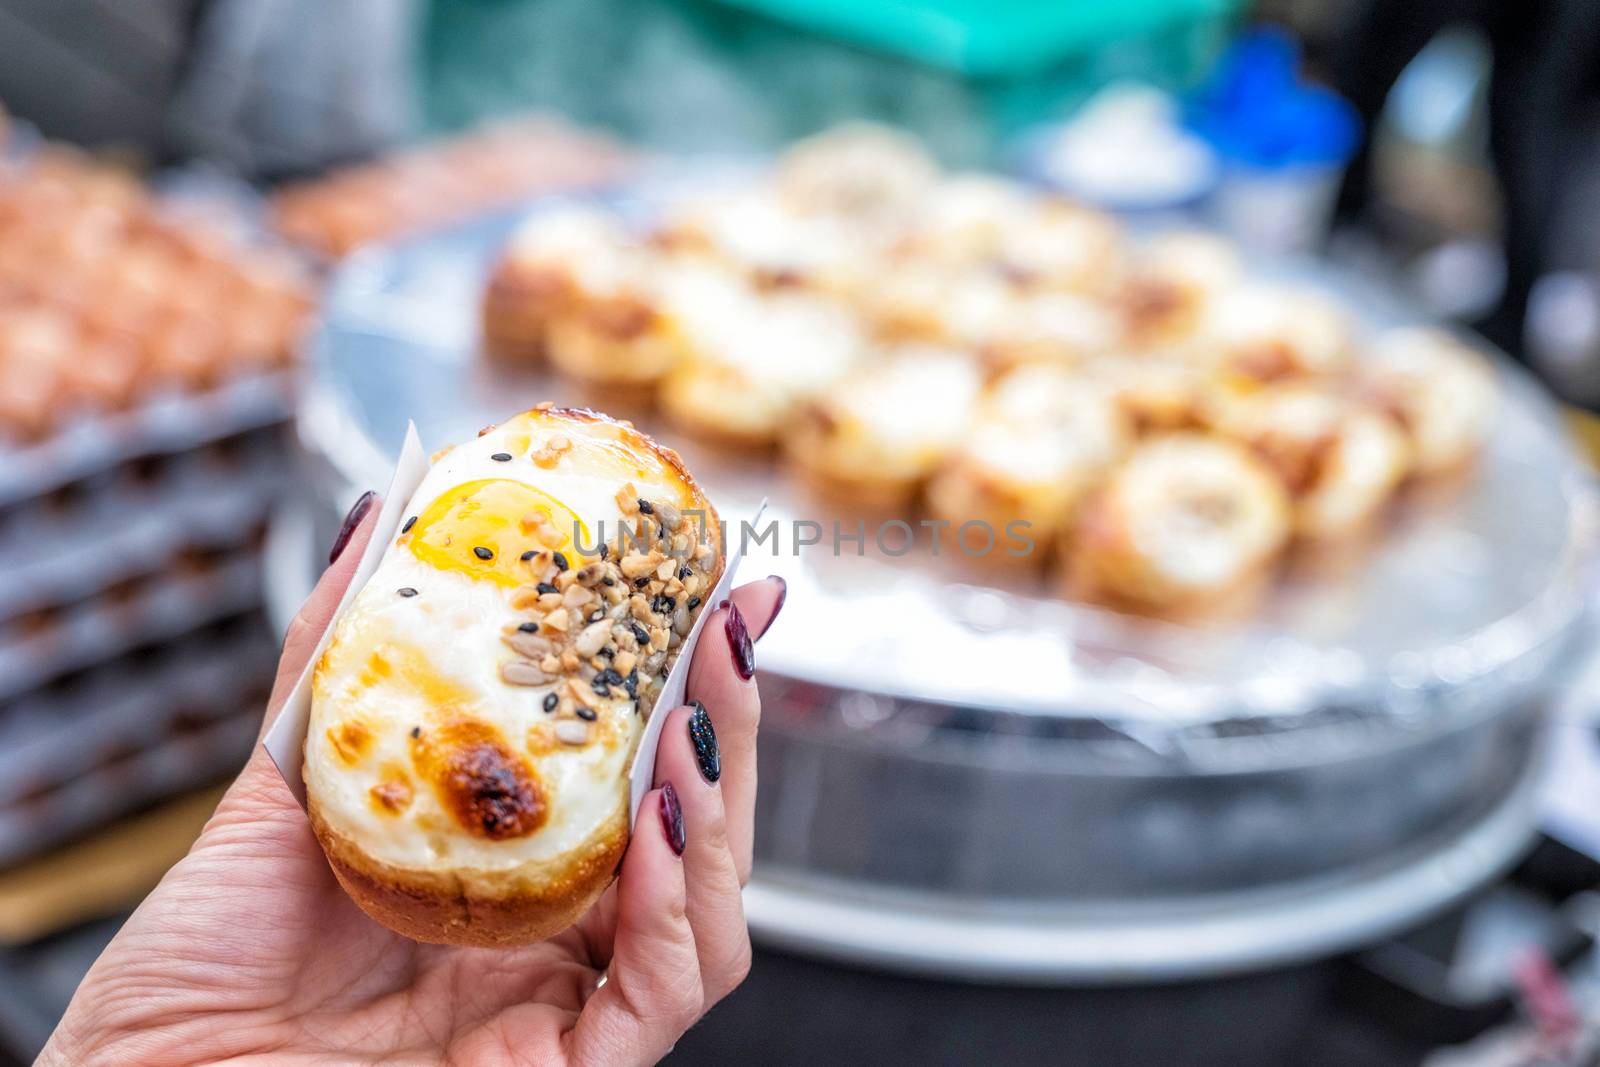 Egg bread with almond, peanut and sunflower seed at Myeong-dong  by Surasak